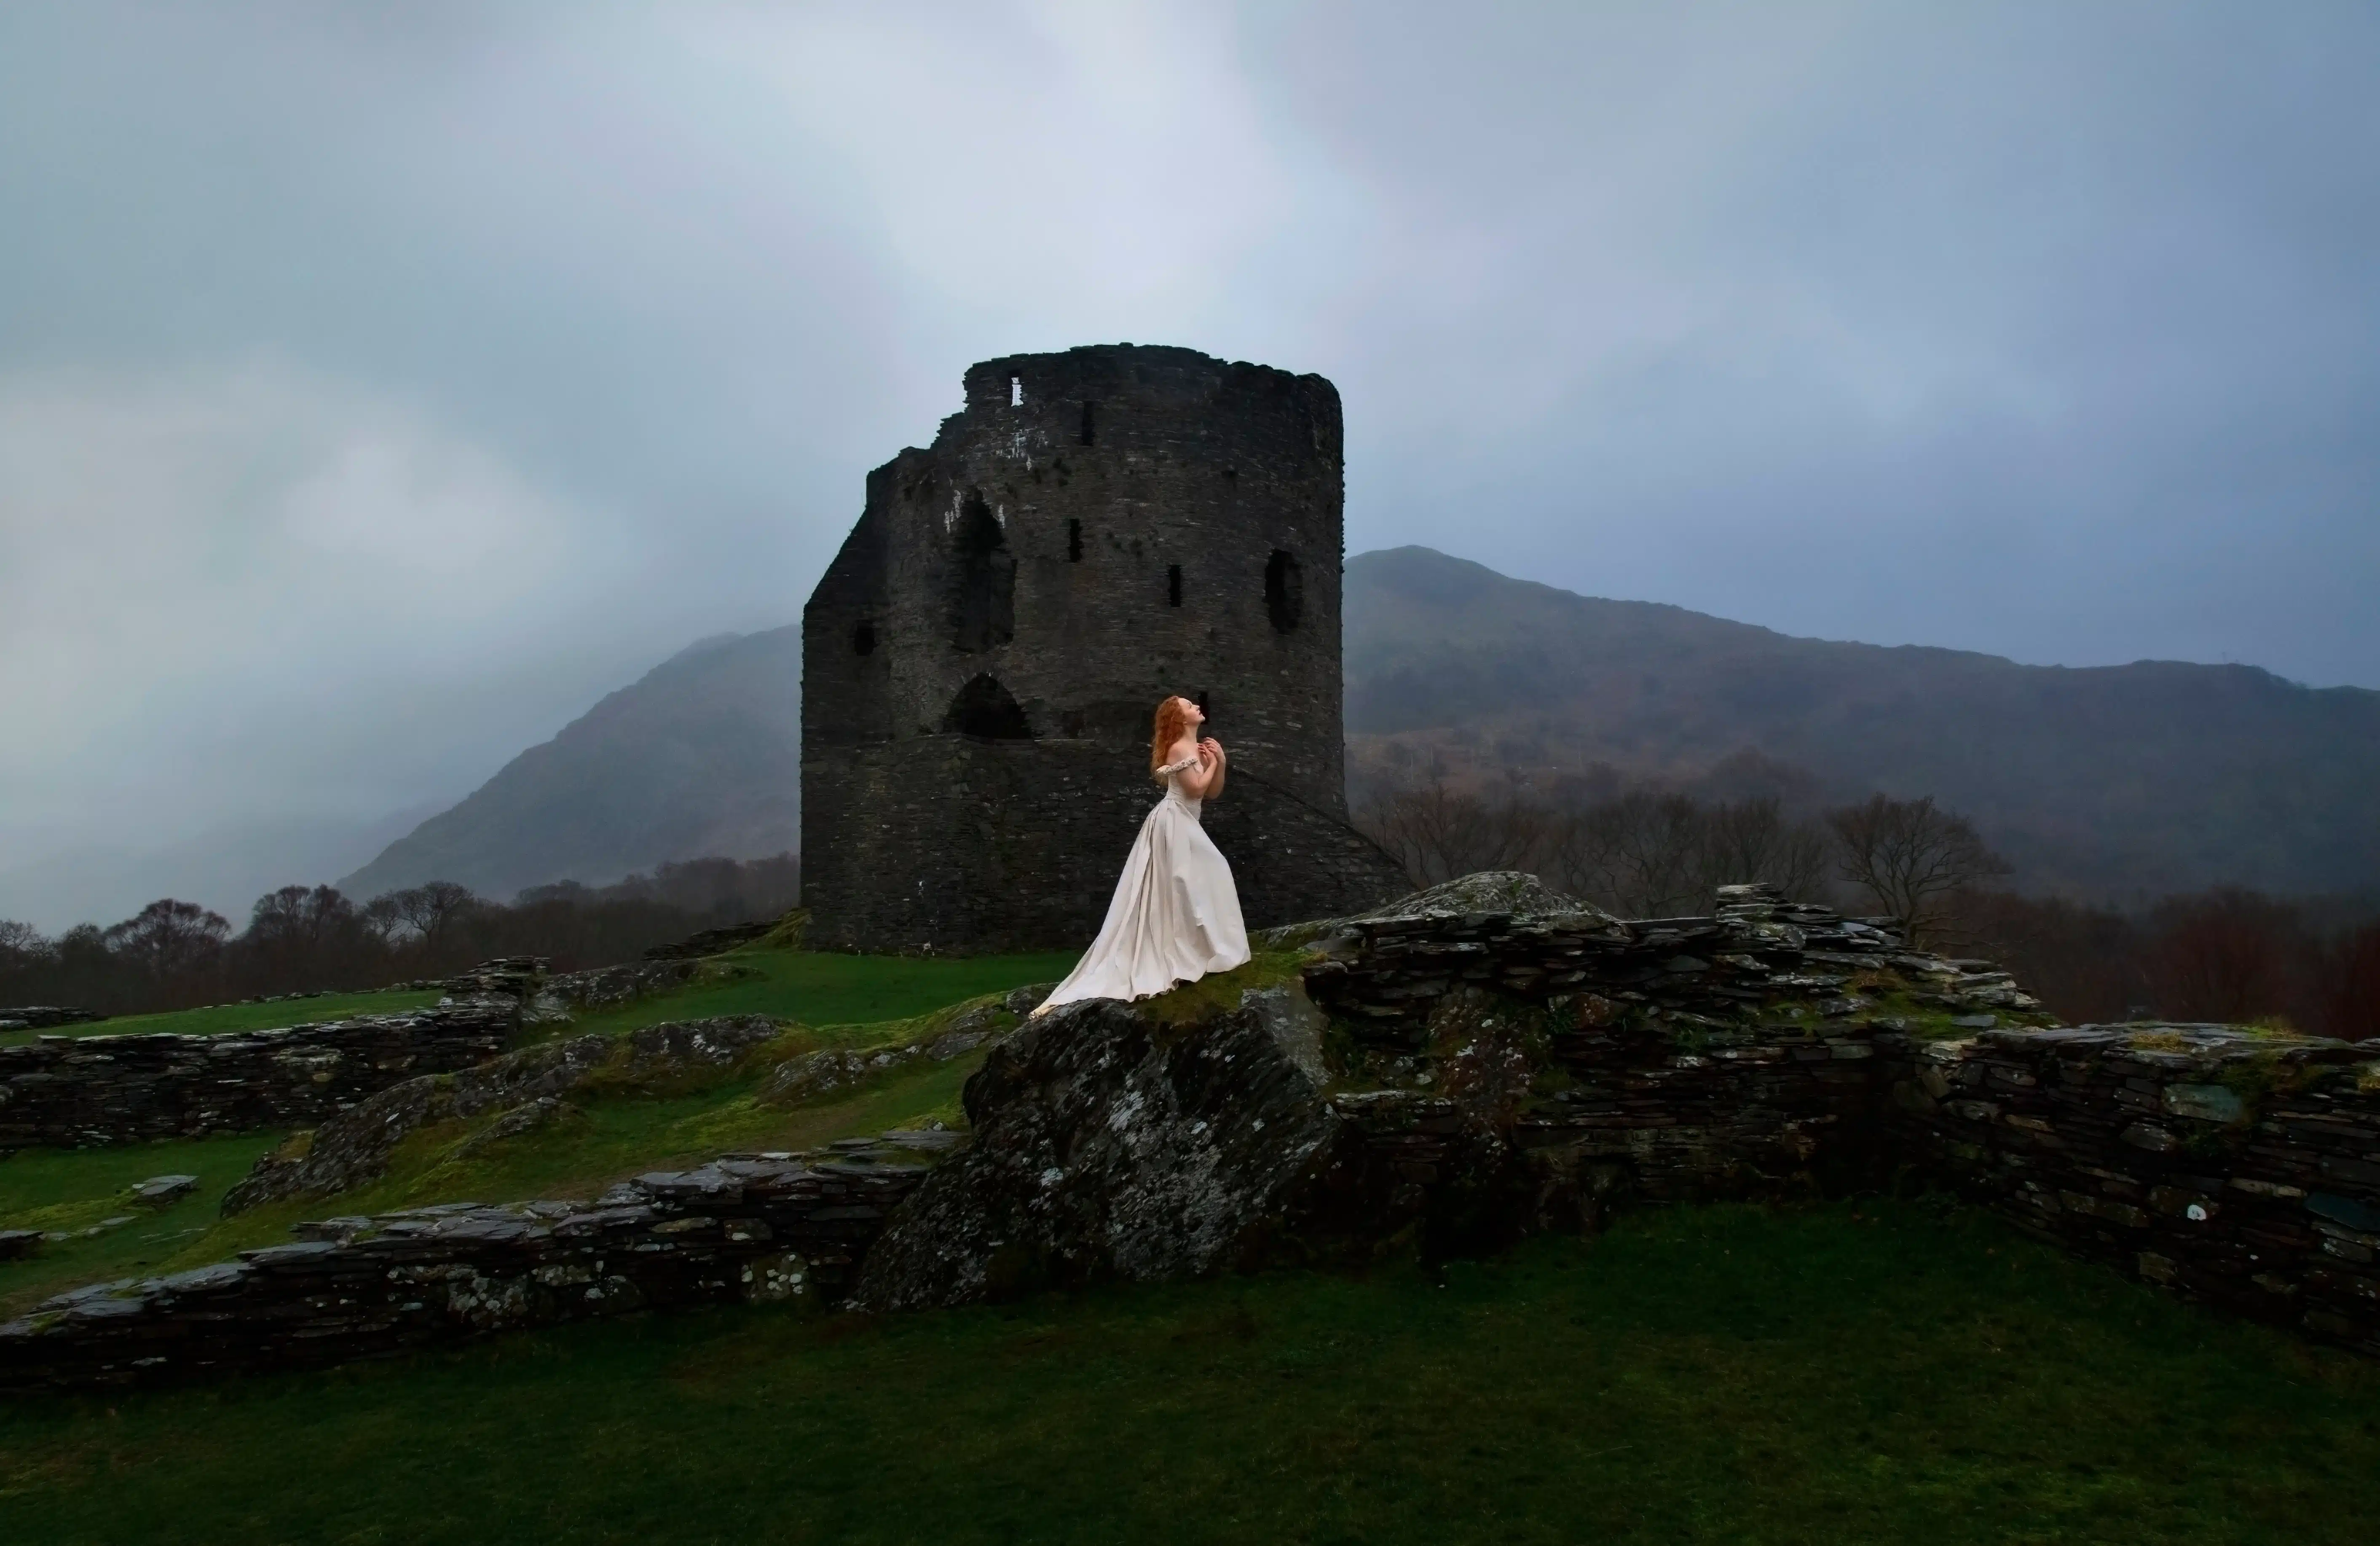 Woman in long white dress standing in front of a Castle 